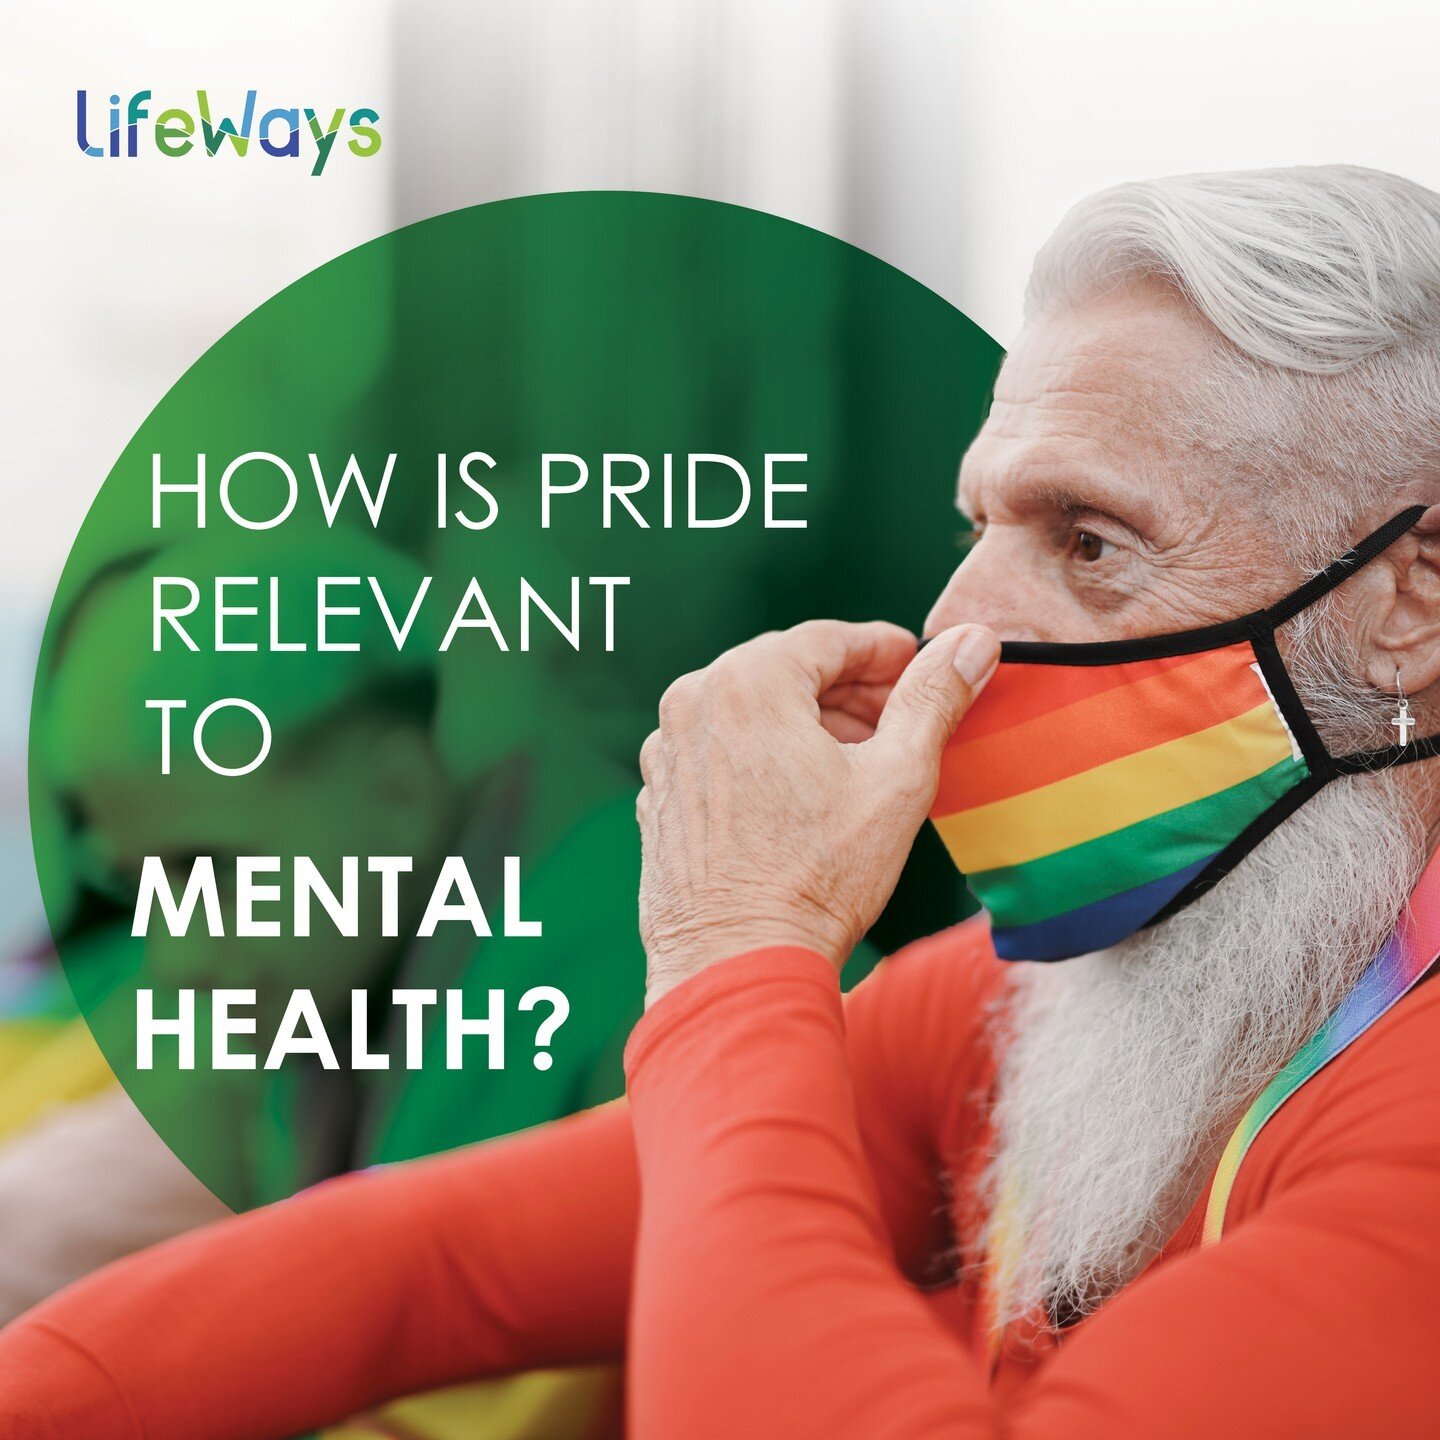 Being LGBTQ+ is not a mental health condition.

However, LGBTQ+ individuals experience mental health struggles at higher rates than their straight and cisgender peers.

◾ LGBTQ+ people are twice as likely as non-LGBTQ+ people to have a mental health 